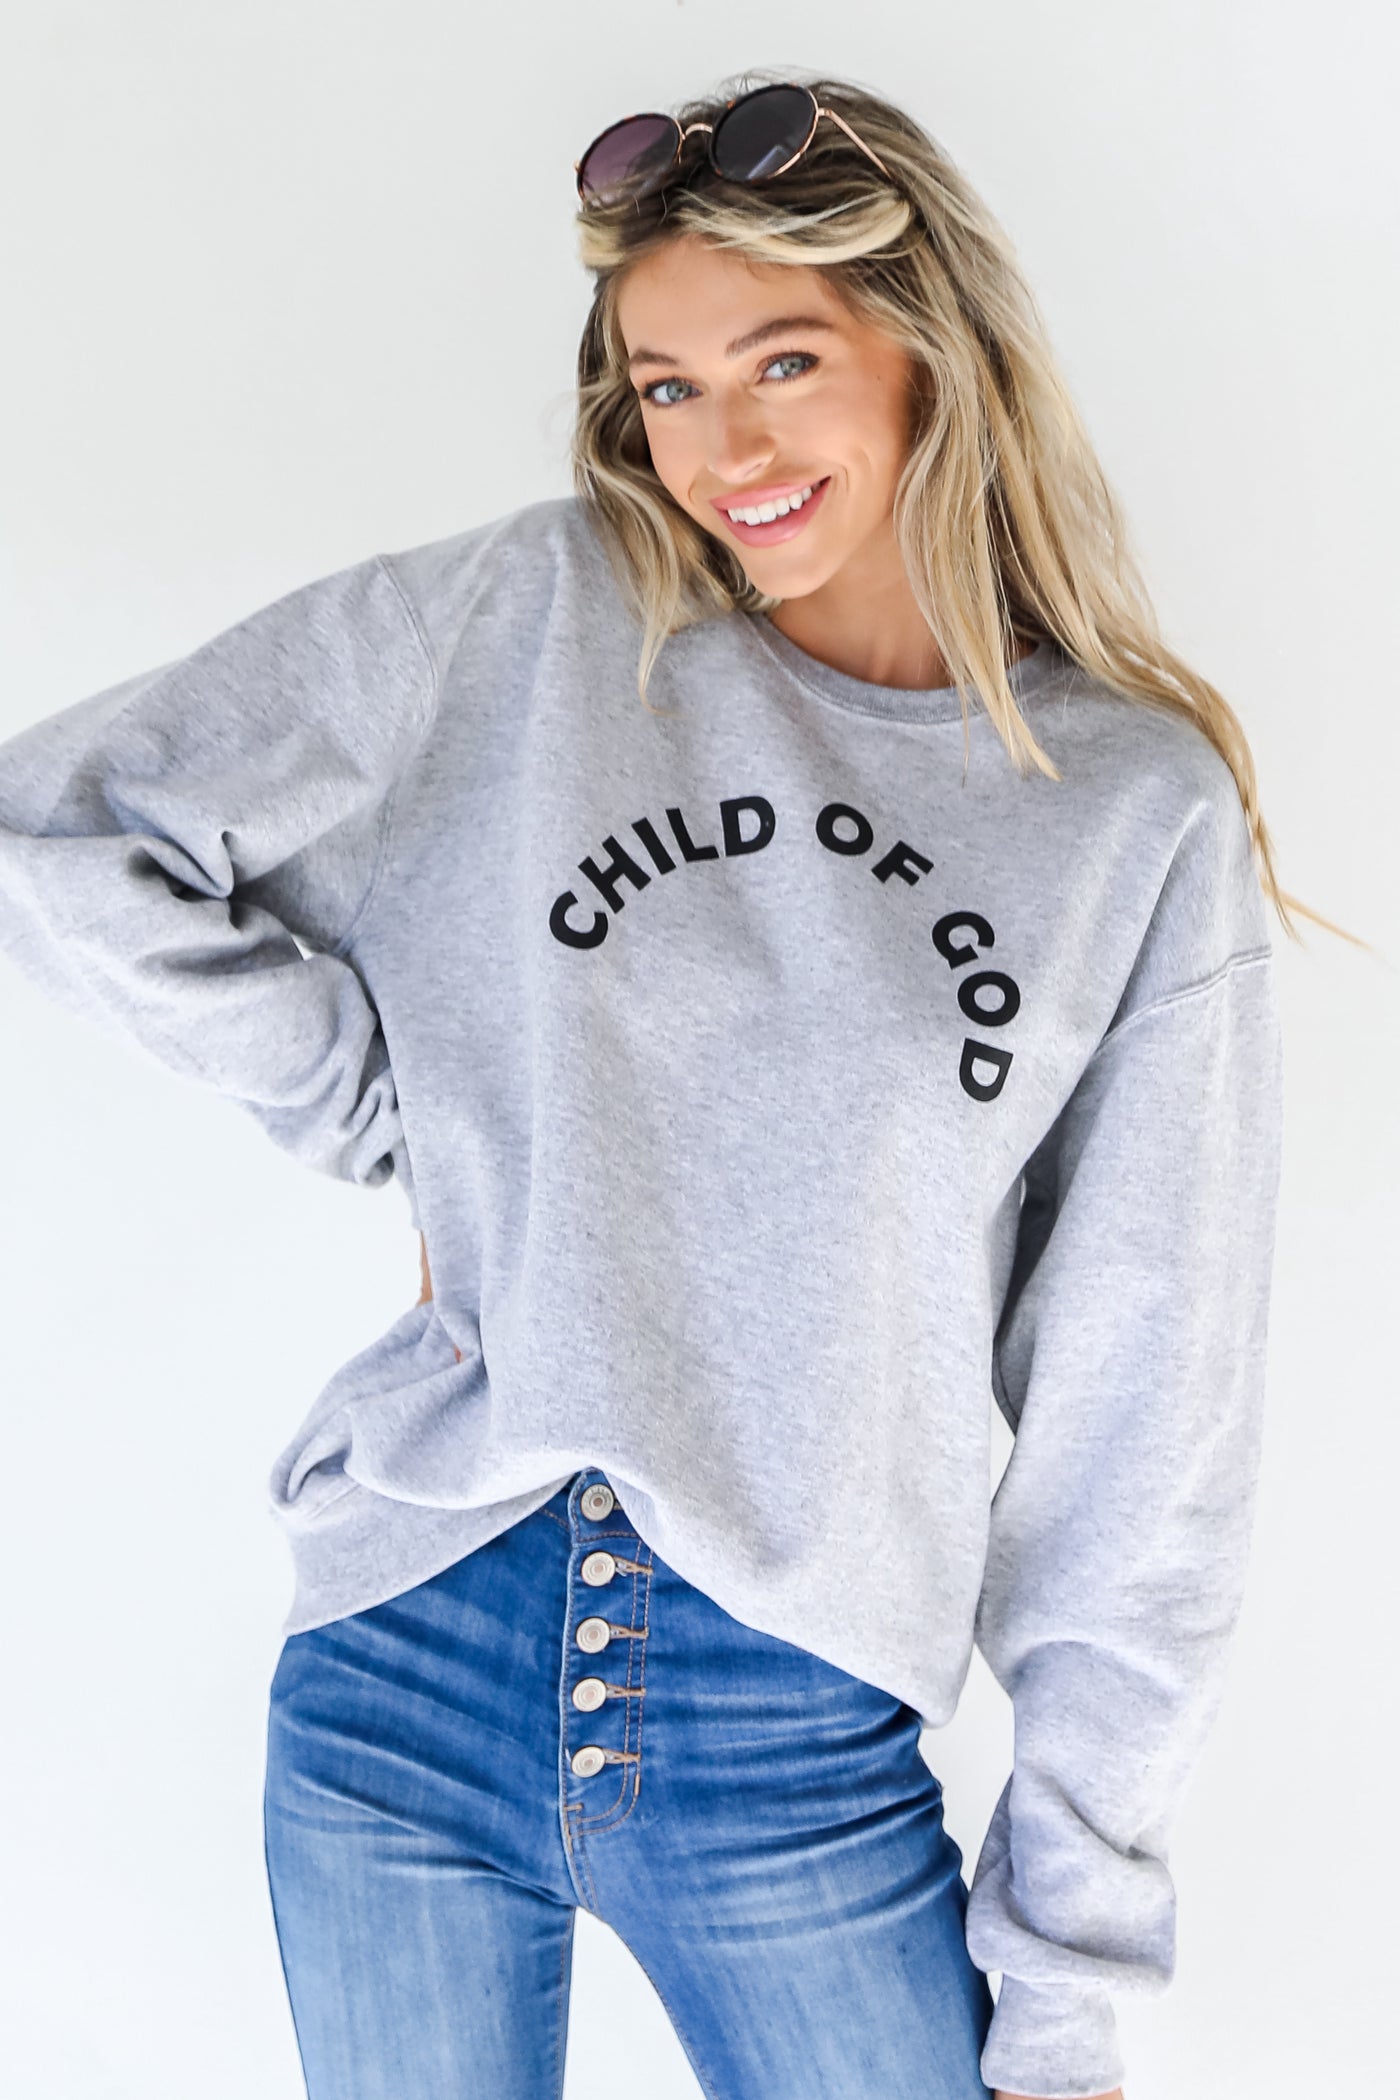 Child Of God Pullover. Christian Graphic Sweatshirt. Comfy Christian Child of God Sweatshirt